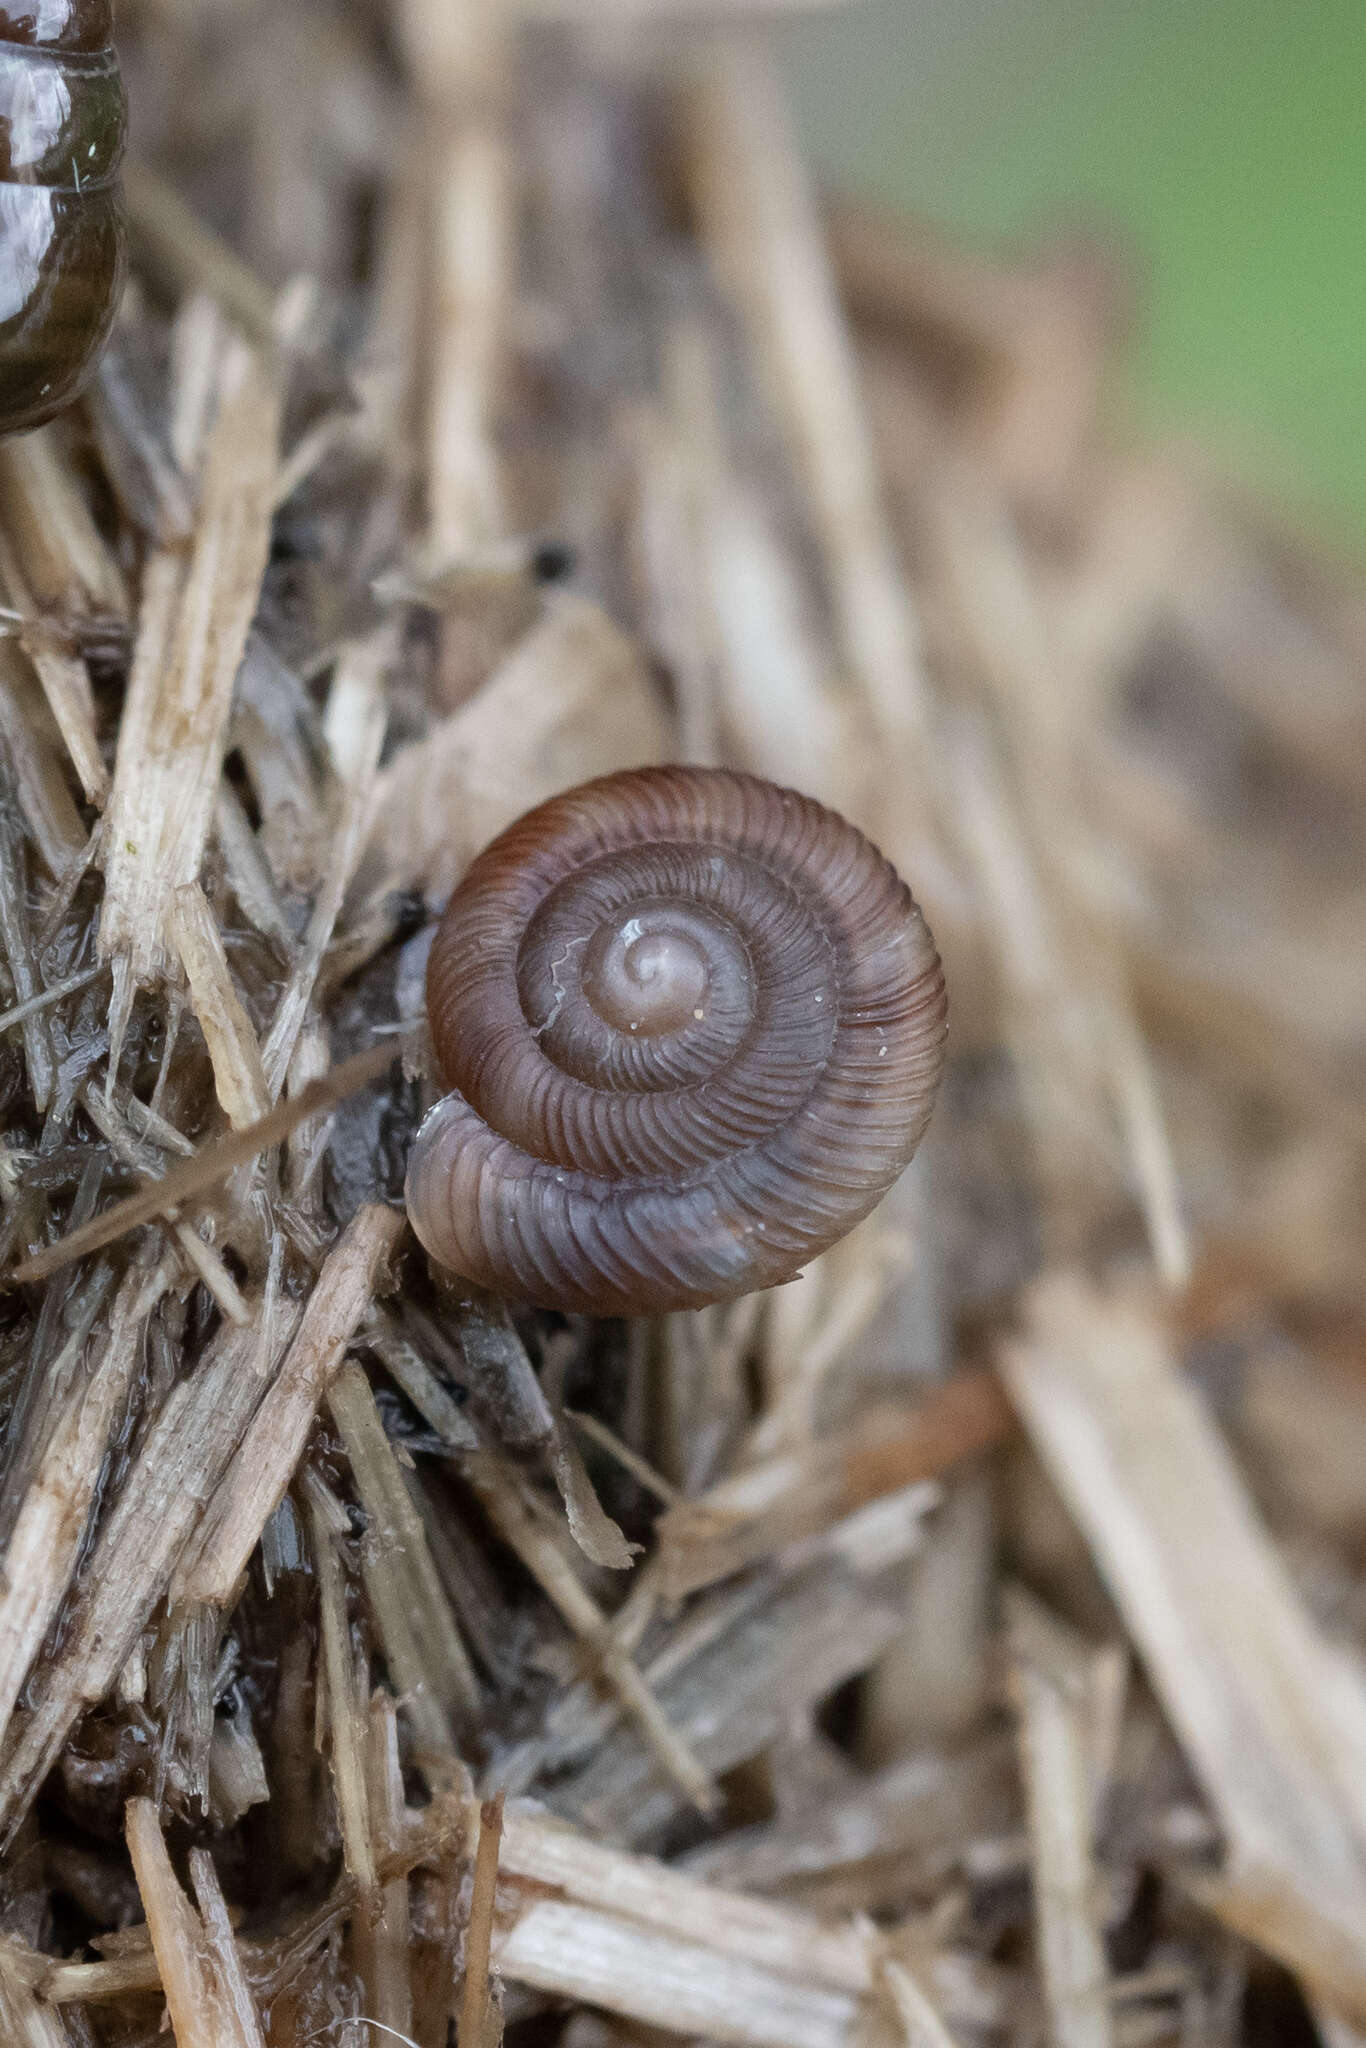 Image of rounded snail